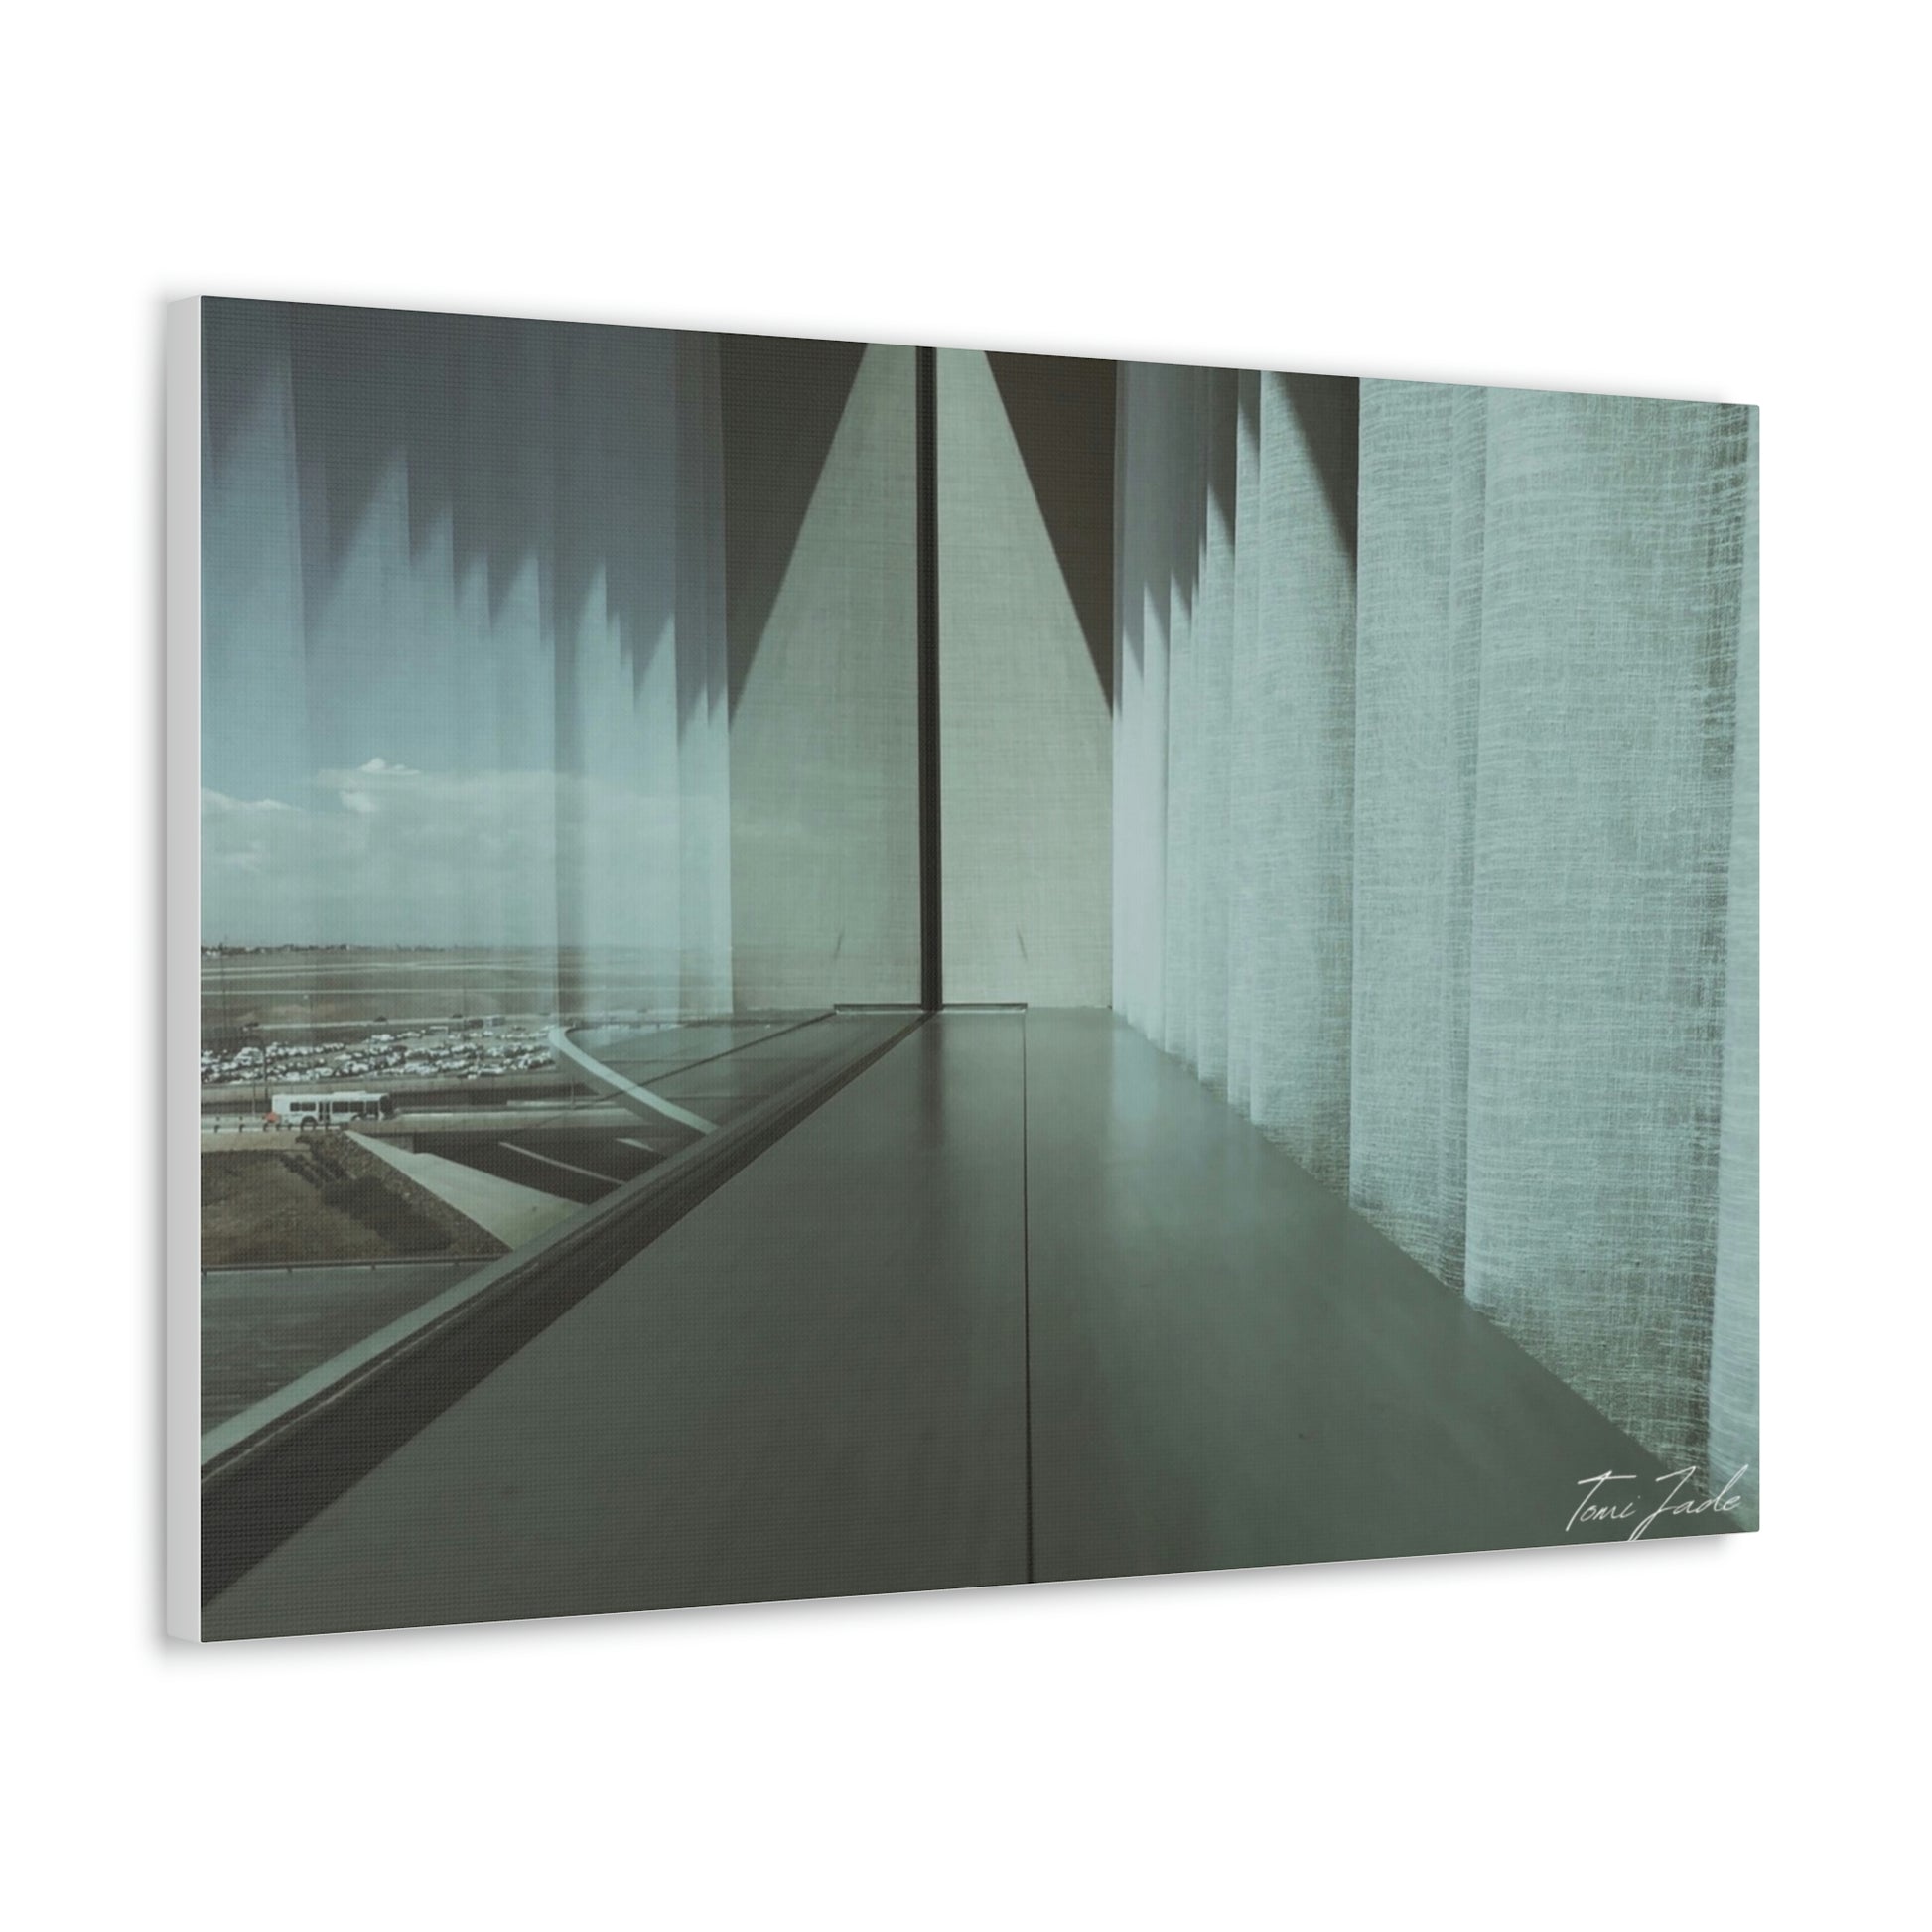 Balance of Symmetry - Canvas Gallery Wraps - TomiJadePhotos. Our minimalist wall art has a faded green and grey color scheme, and features a symmetrical design that is very pleasing to the eye. It's a great way to add a modern touch to your space. The photo is taken in Denver, Colorado.